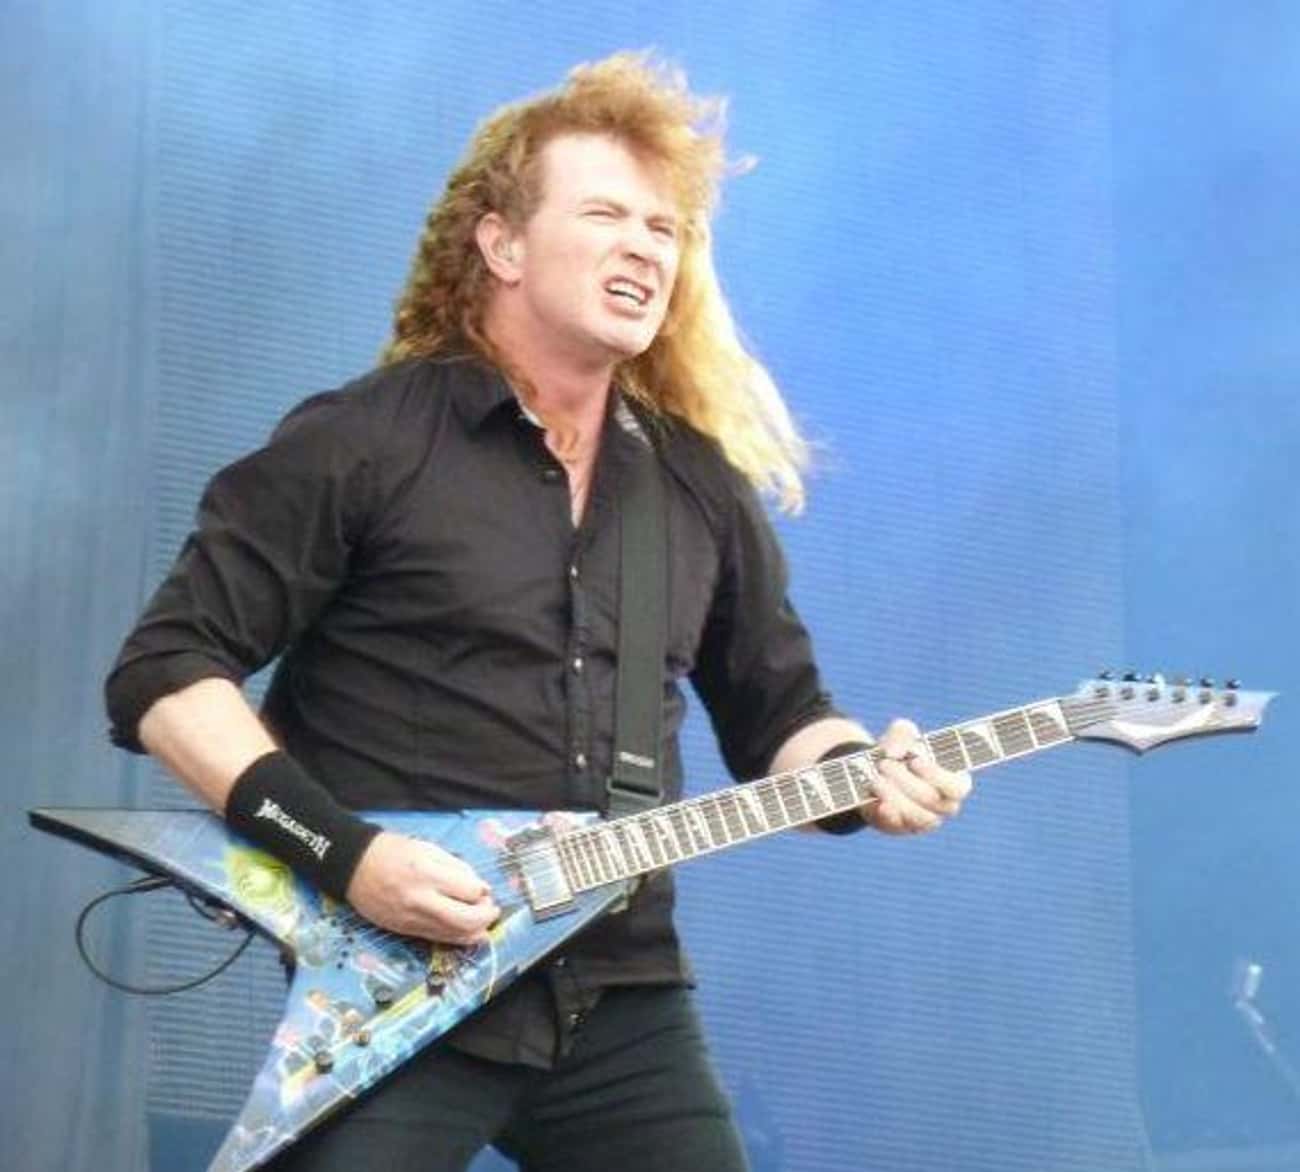 Megadeth's Dave Mustaine